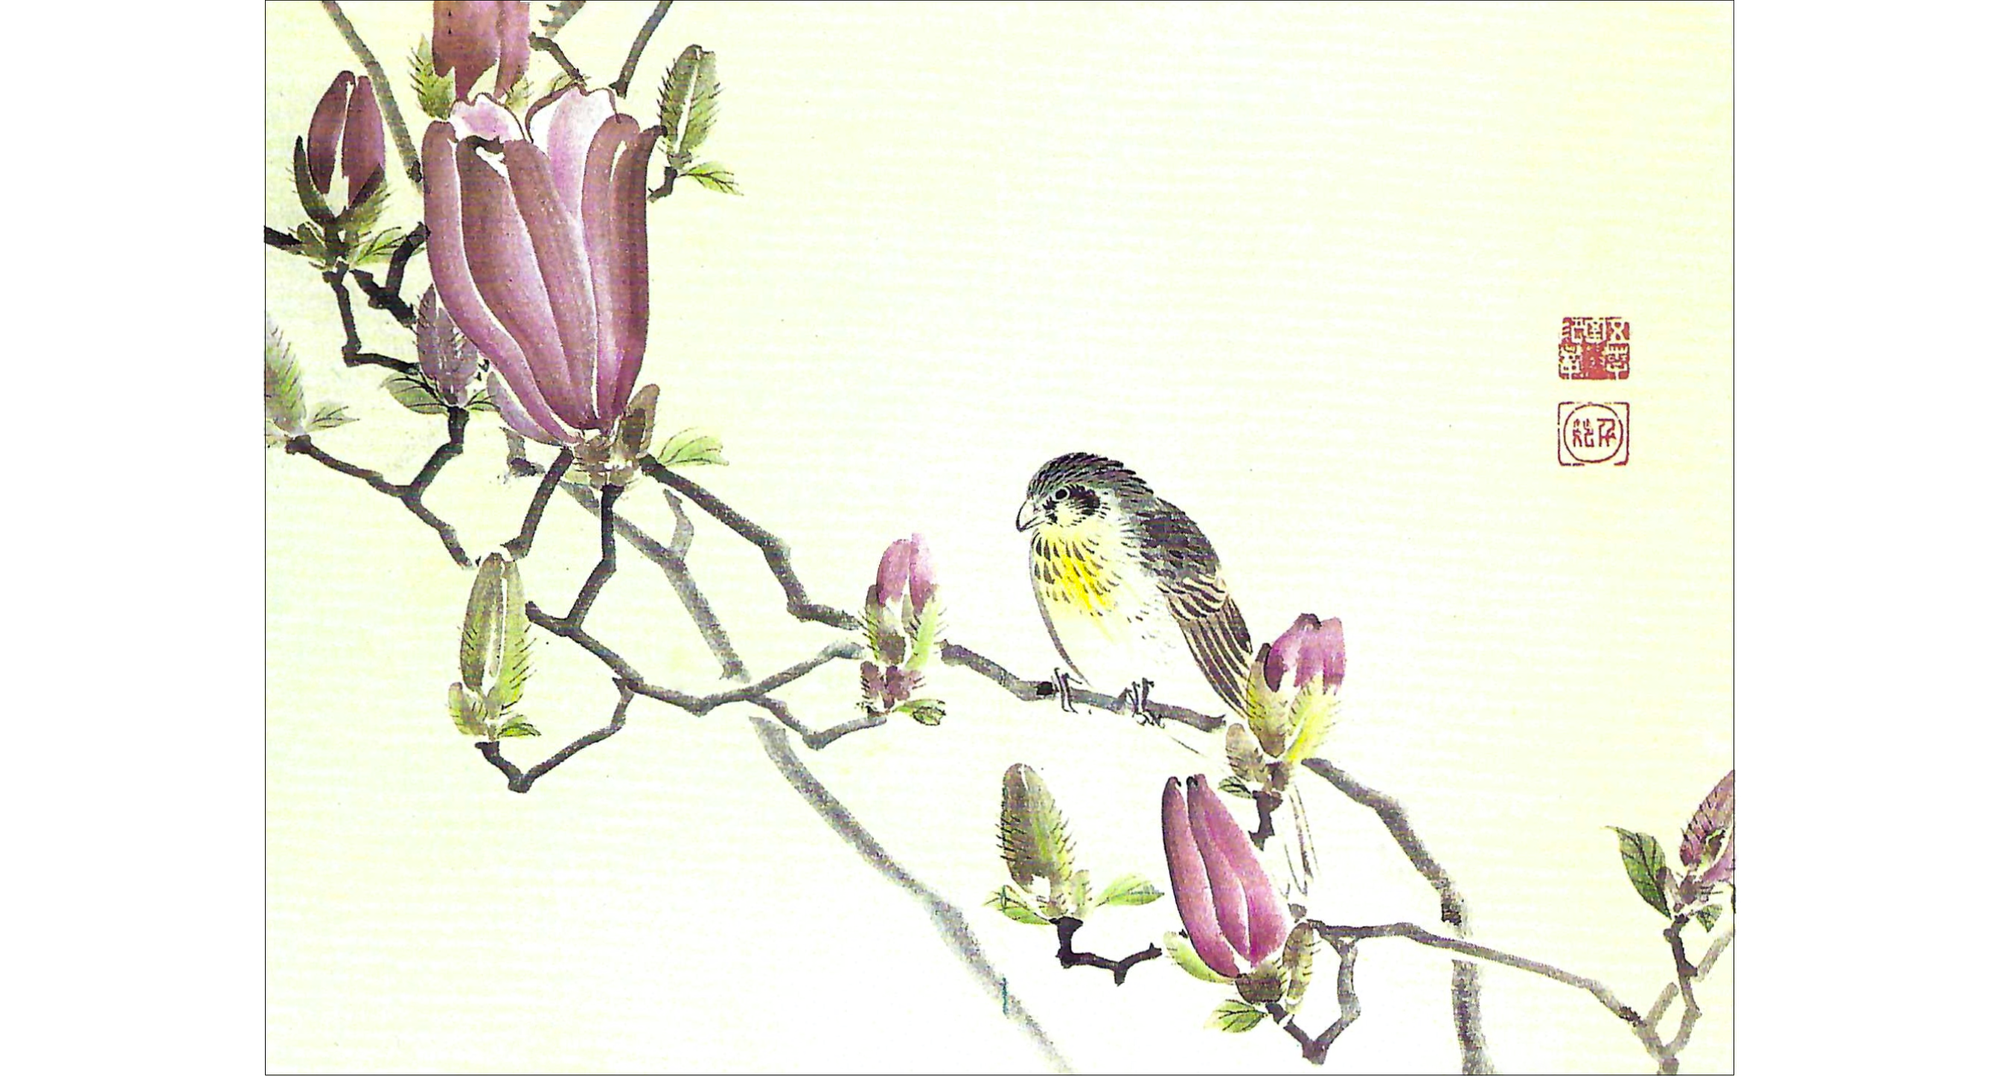 Image of painting of bird on branch of magnolia blossoms